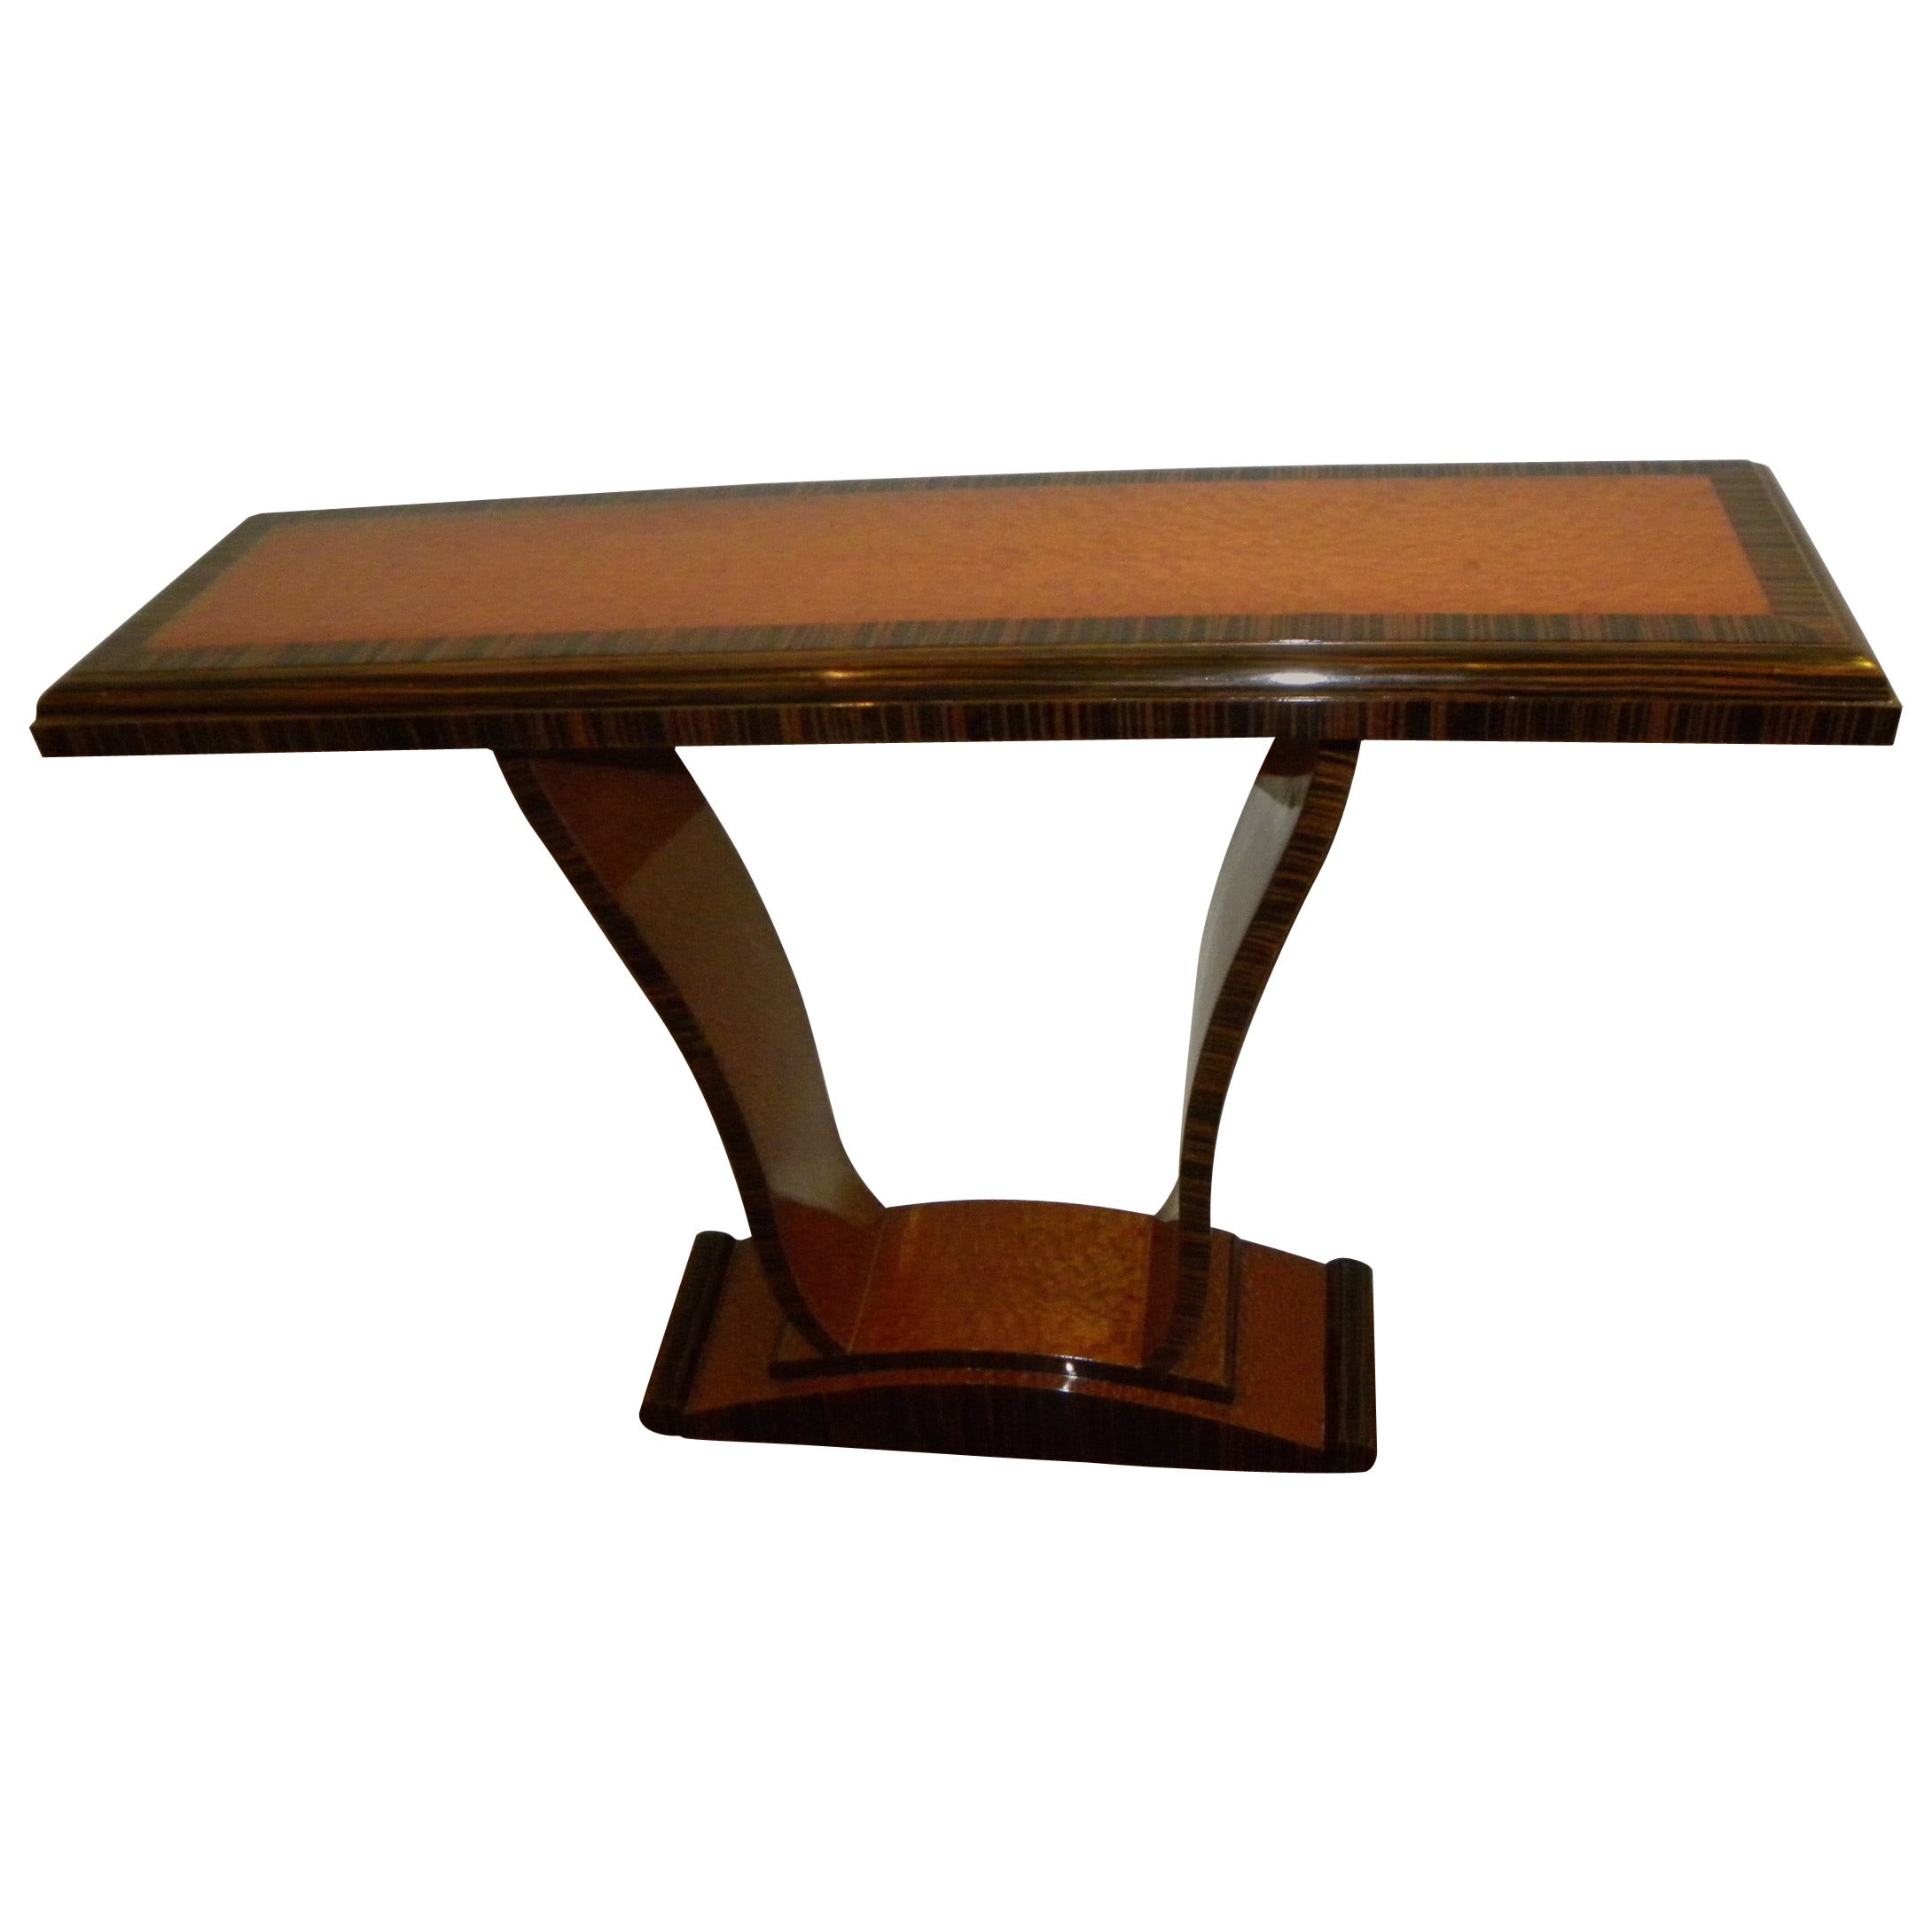 Two-Tone Art Deco Wood Console Table